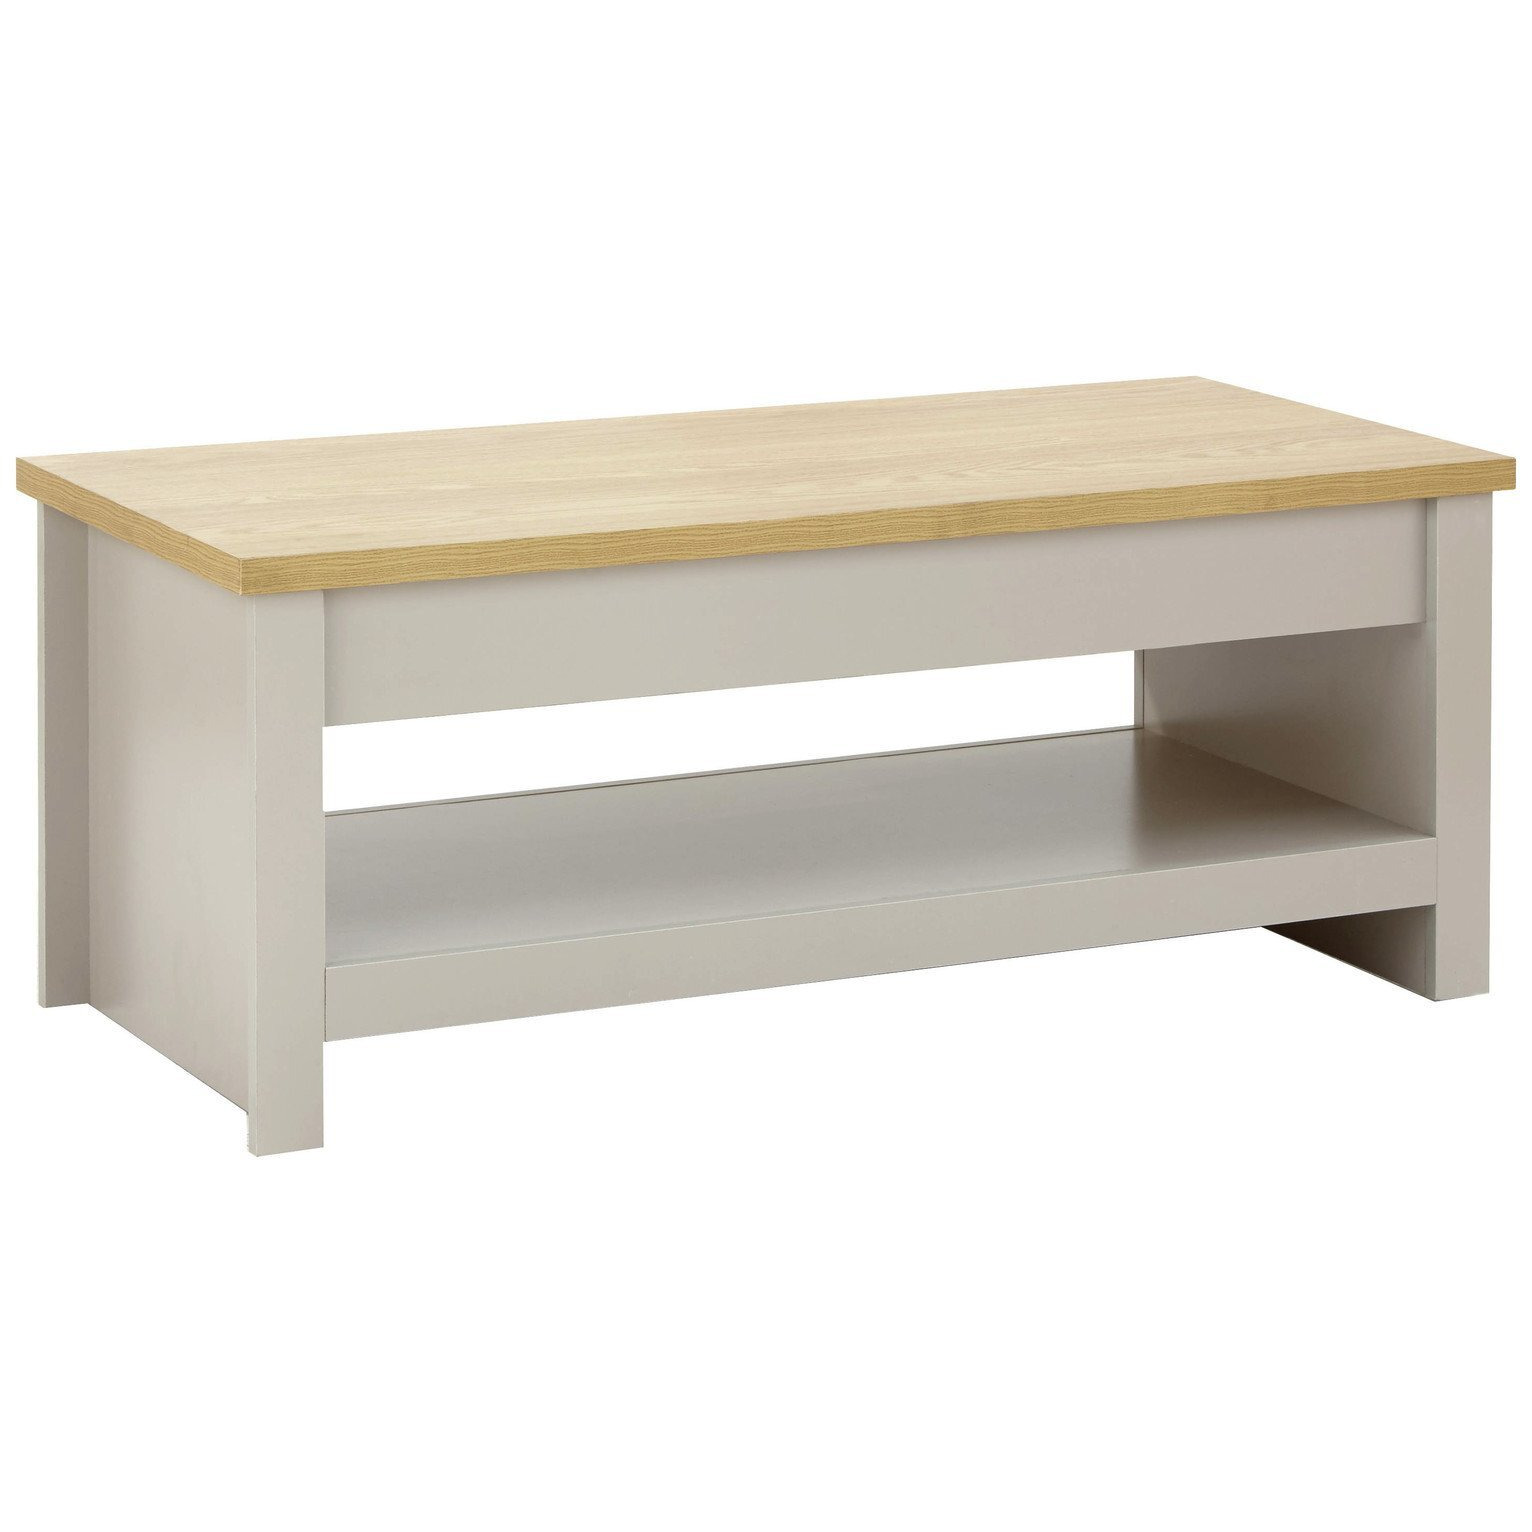 GFW Lancaster Lift Up Coffee Table - Grey - image 1